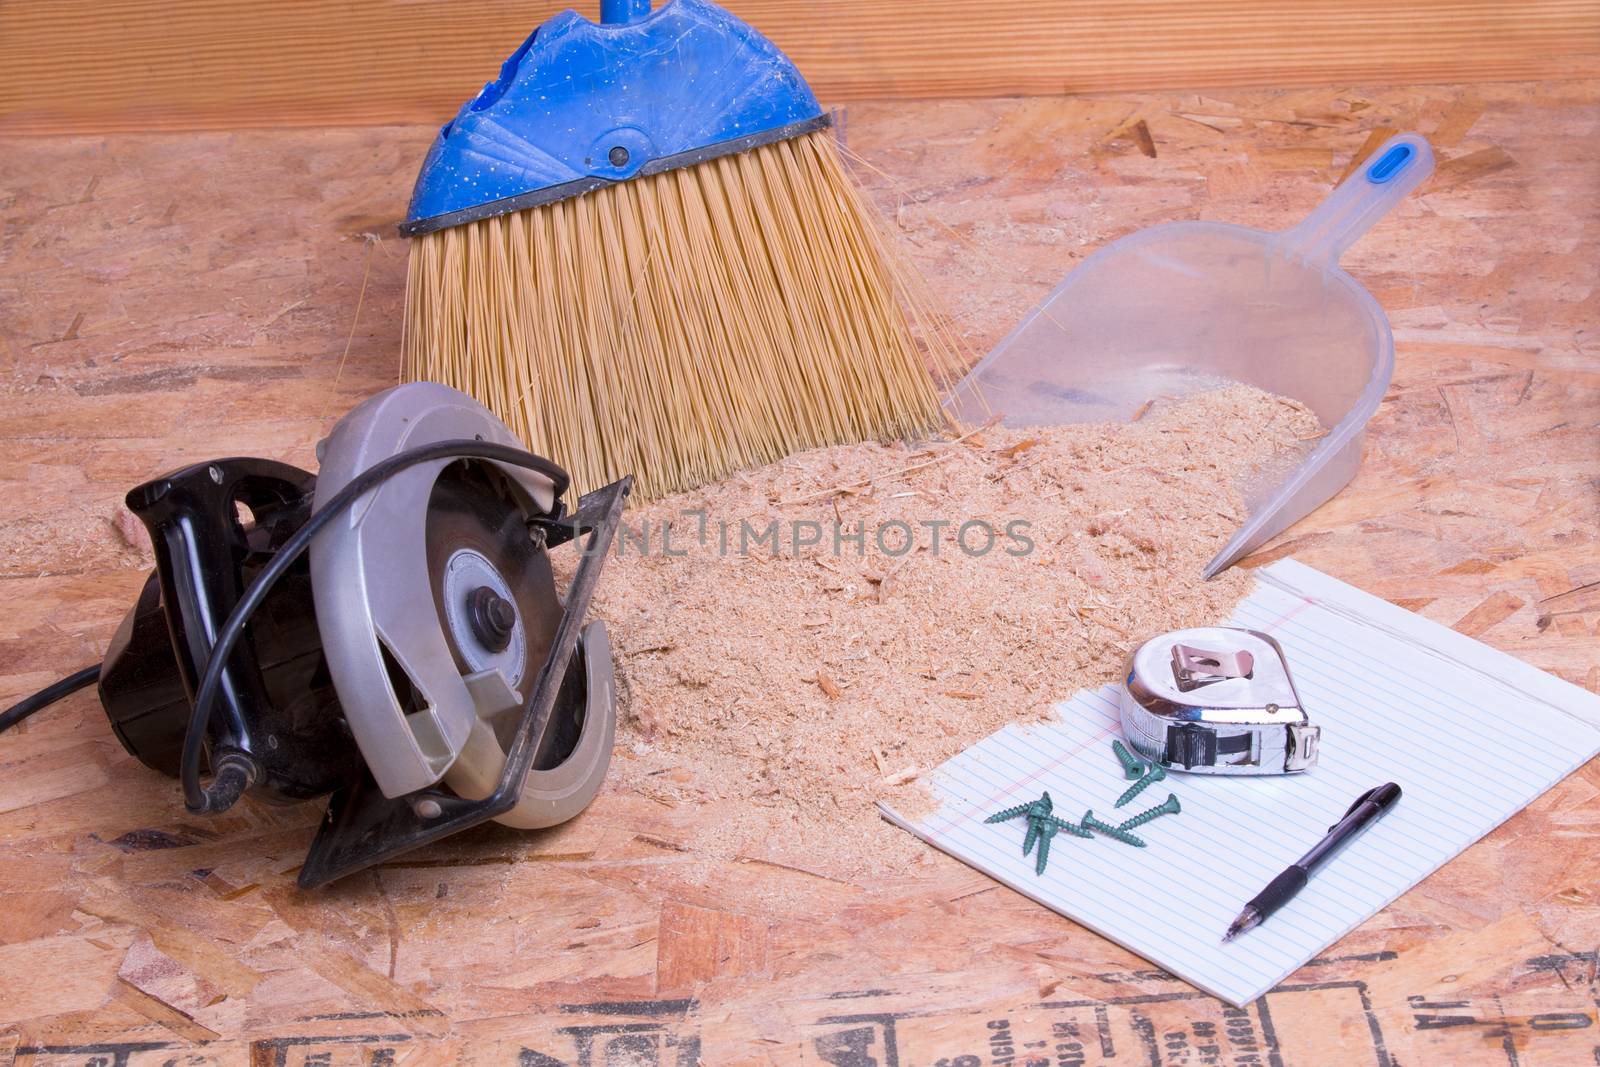 Handheld circular saw with sawdust, brush and pan lying on the floor with a tape measure, pen and nails on a page of paper in a concept of the mess and aftermath of carpentry